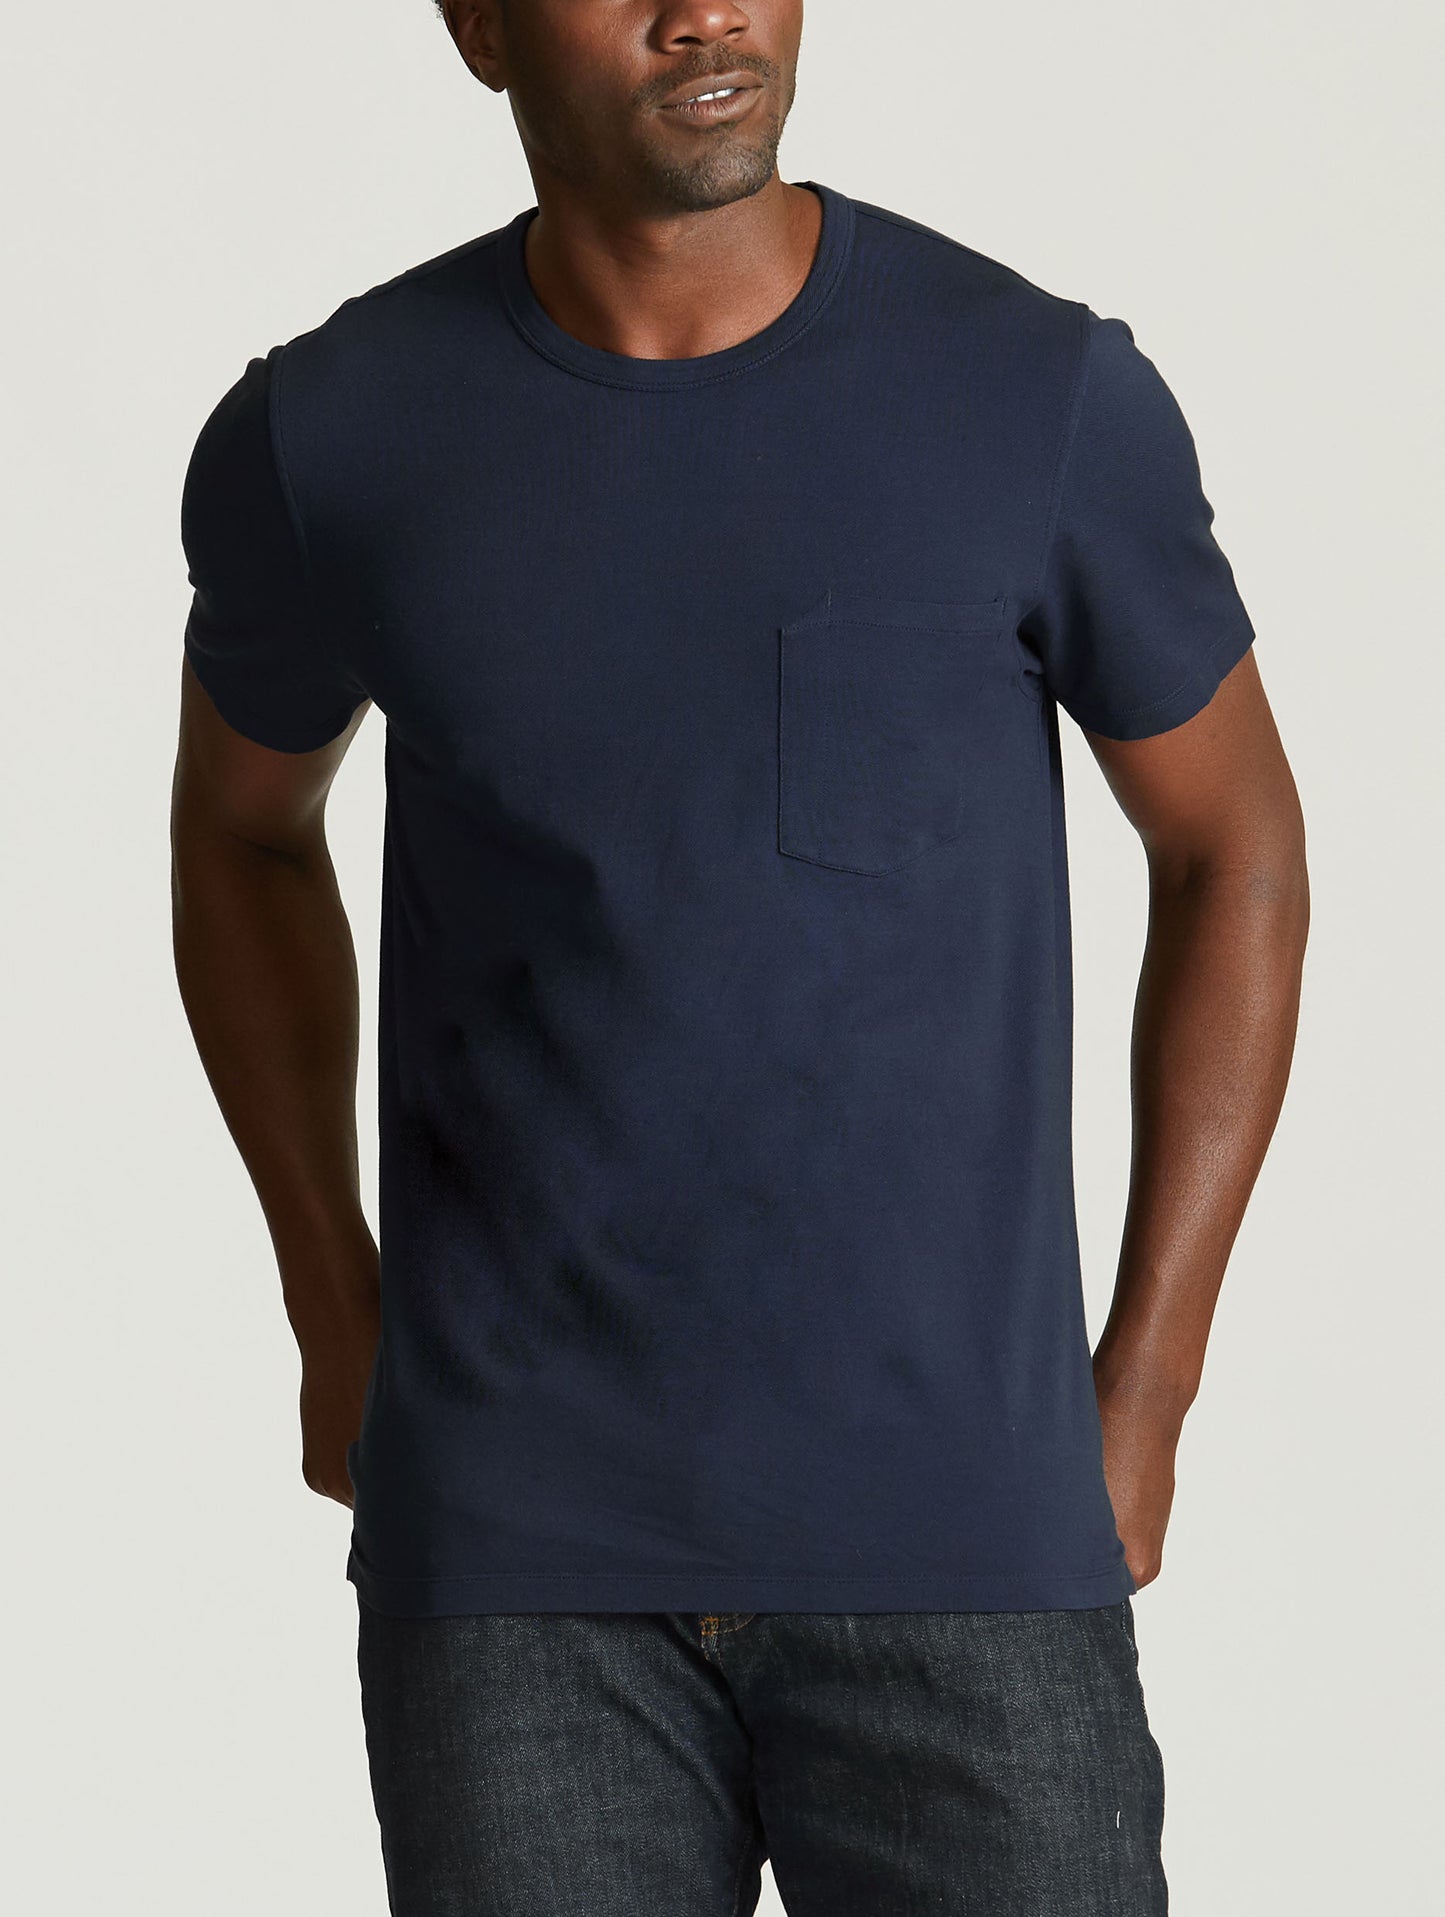 shirt for men from Aether Apparel